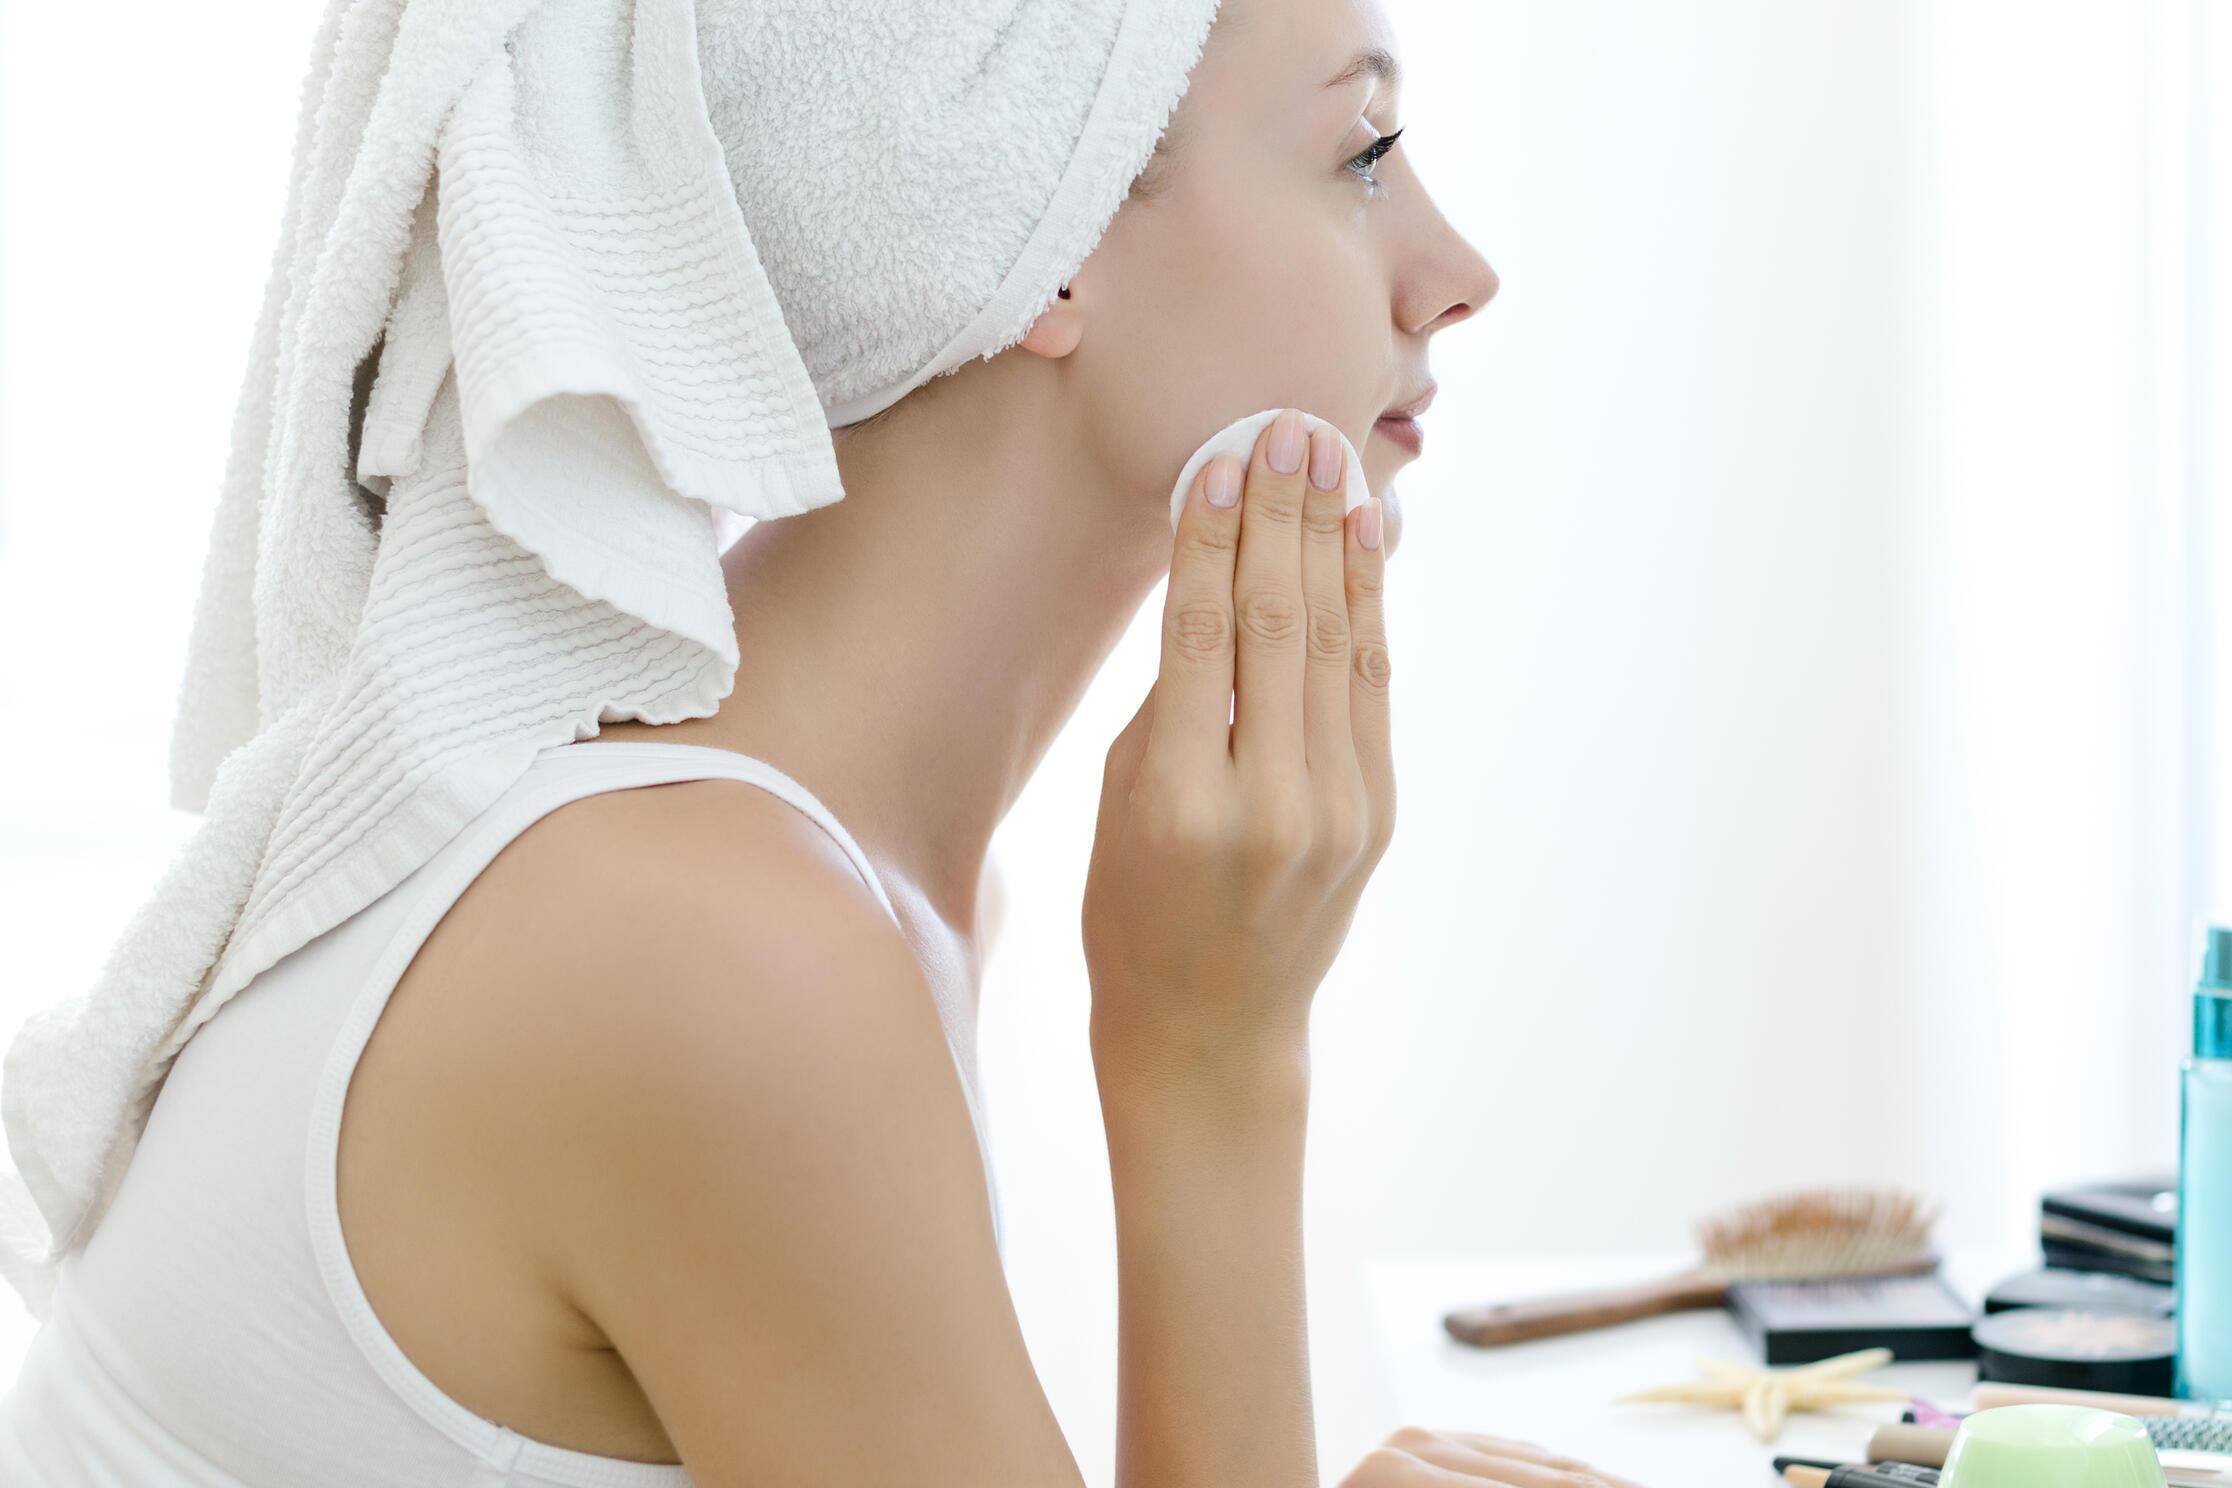 AD_ROUTINE_FACE_WOMAN_TOWEL_2021